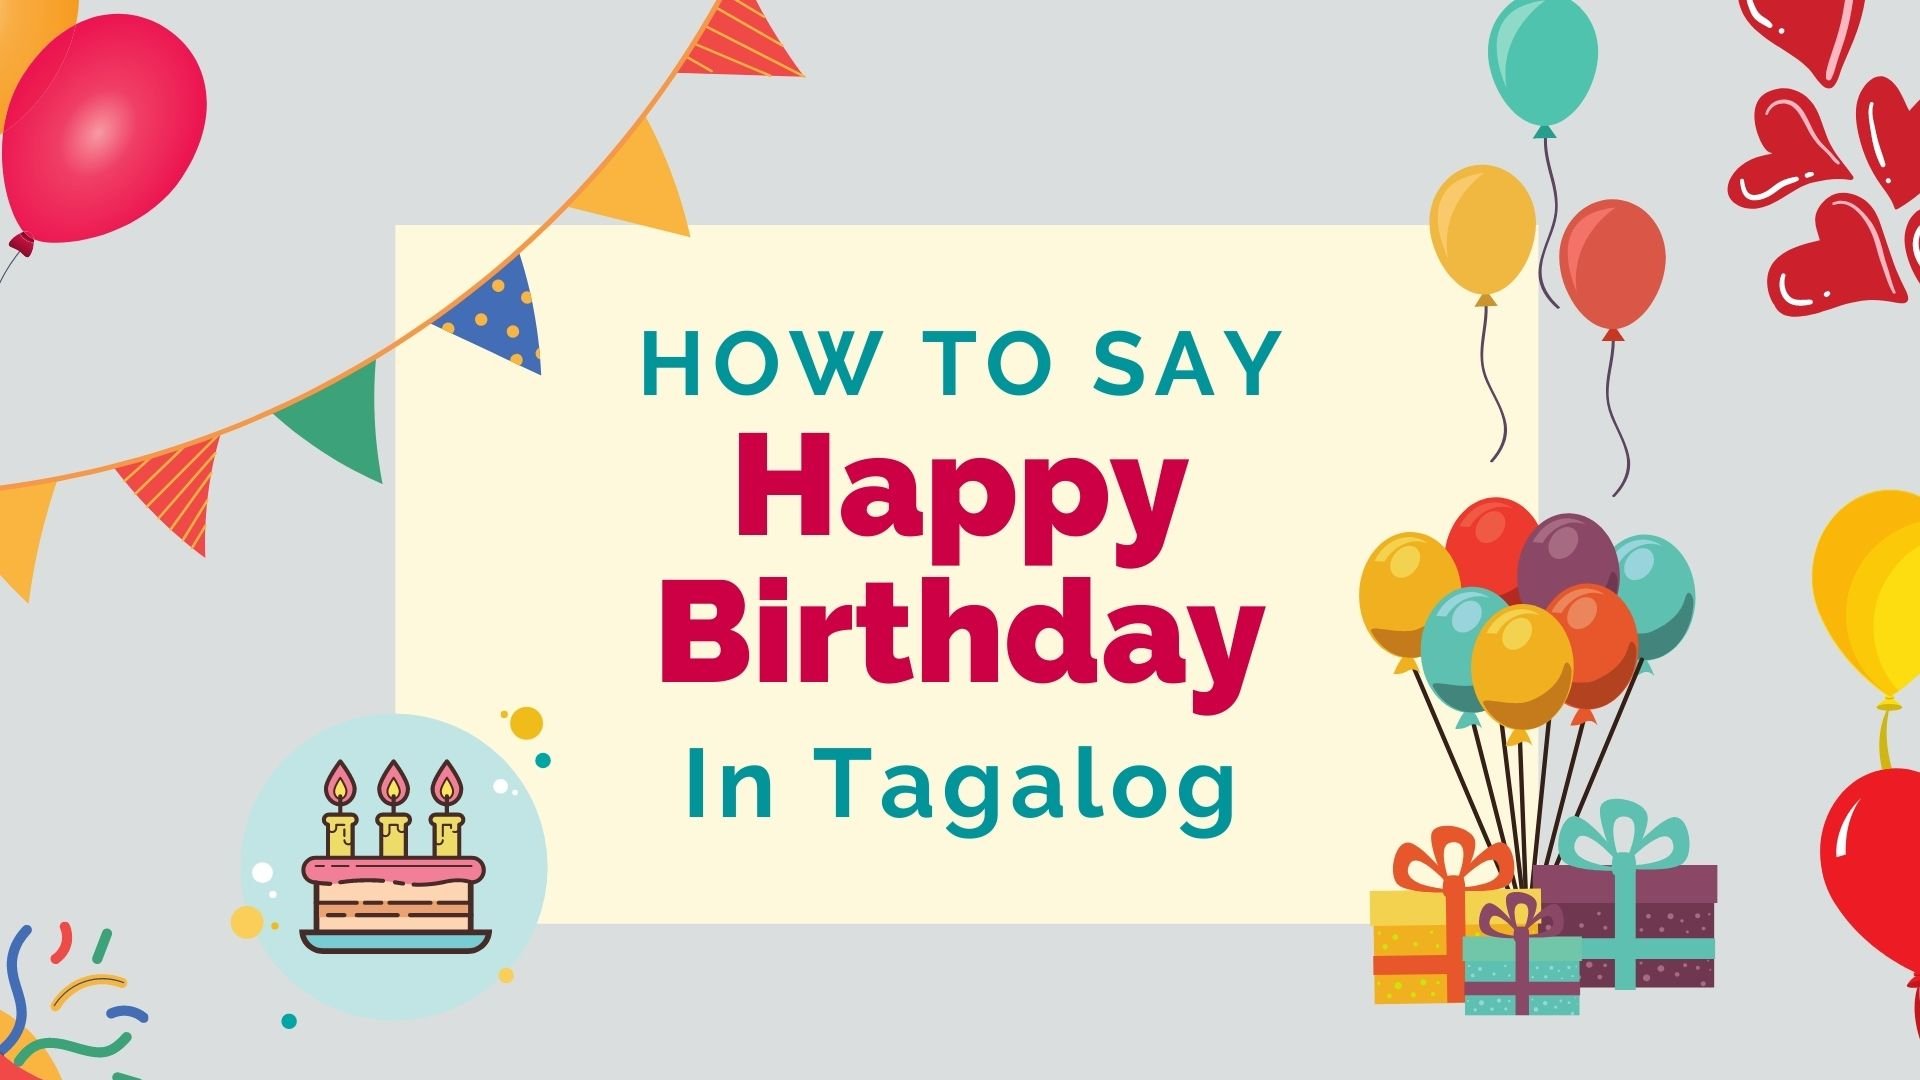 How To Say ‘Happy Birthday’ In Tagalog - Lingalot